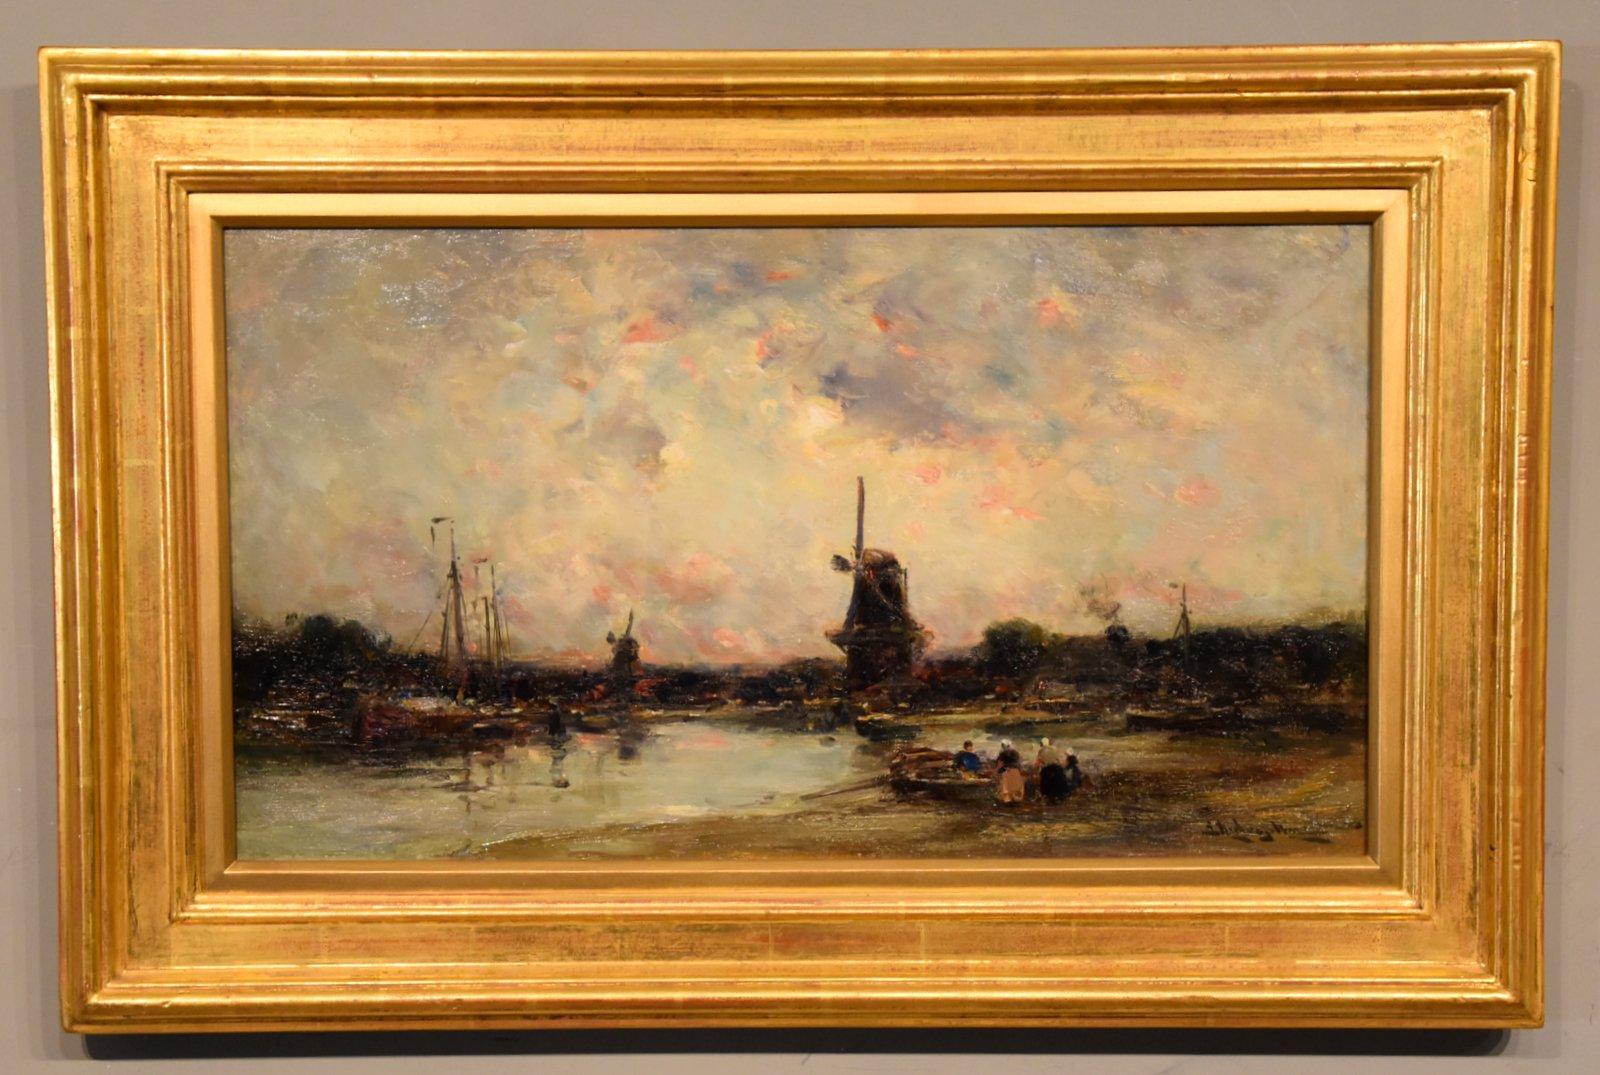 Oil Painting by Edmund Aubrey Hunt "A Dutch Estuary, Evening" 1855- 1922 Massachusetts painter who studied under Gerome in Paris who then settled in London. Exhibited at the Royal Academy Boston, Paris Salon, New English Art club and Royal society